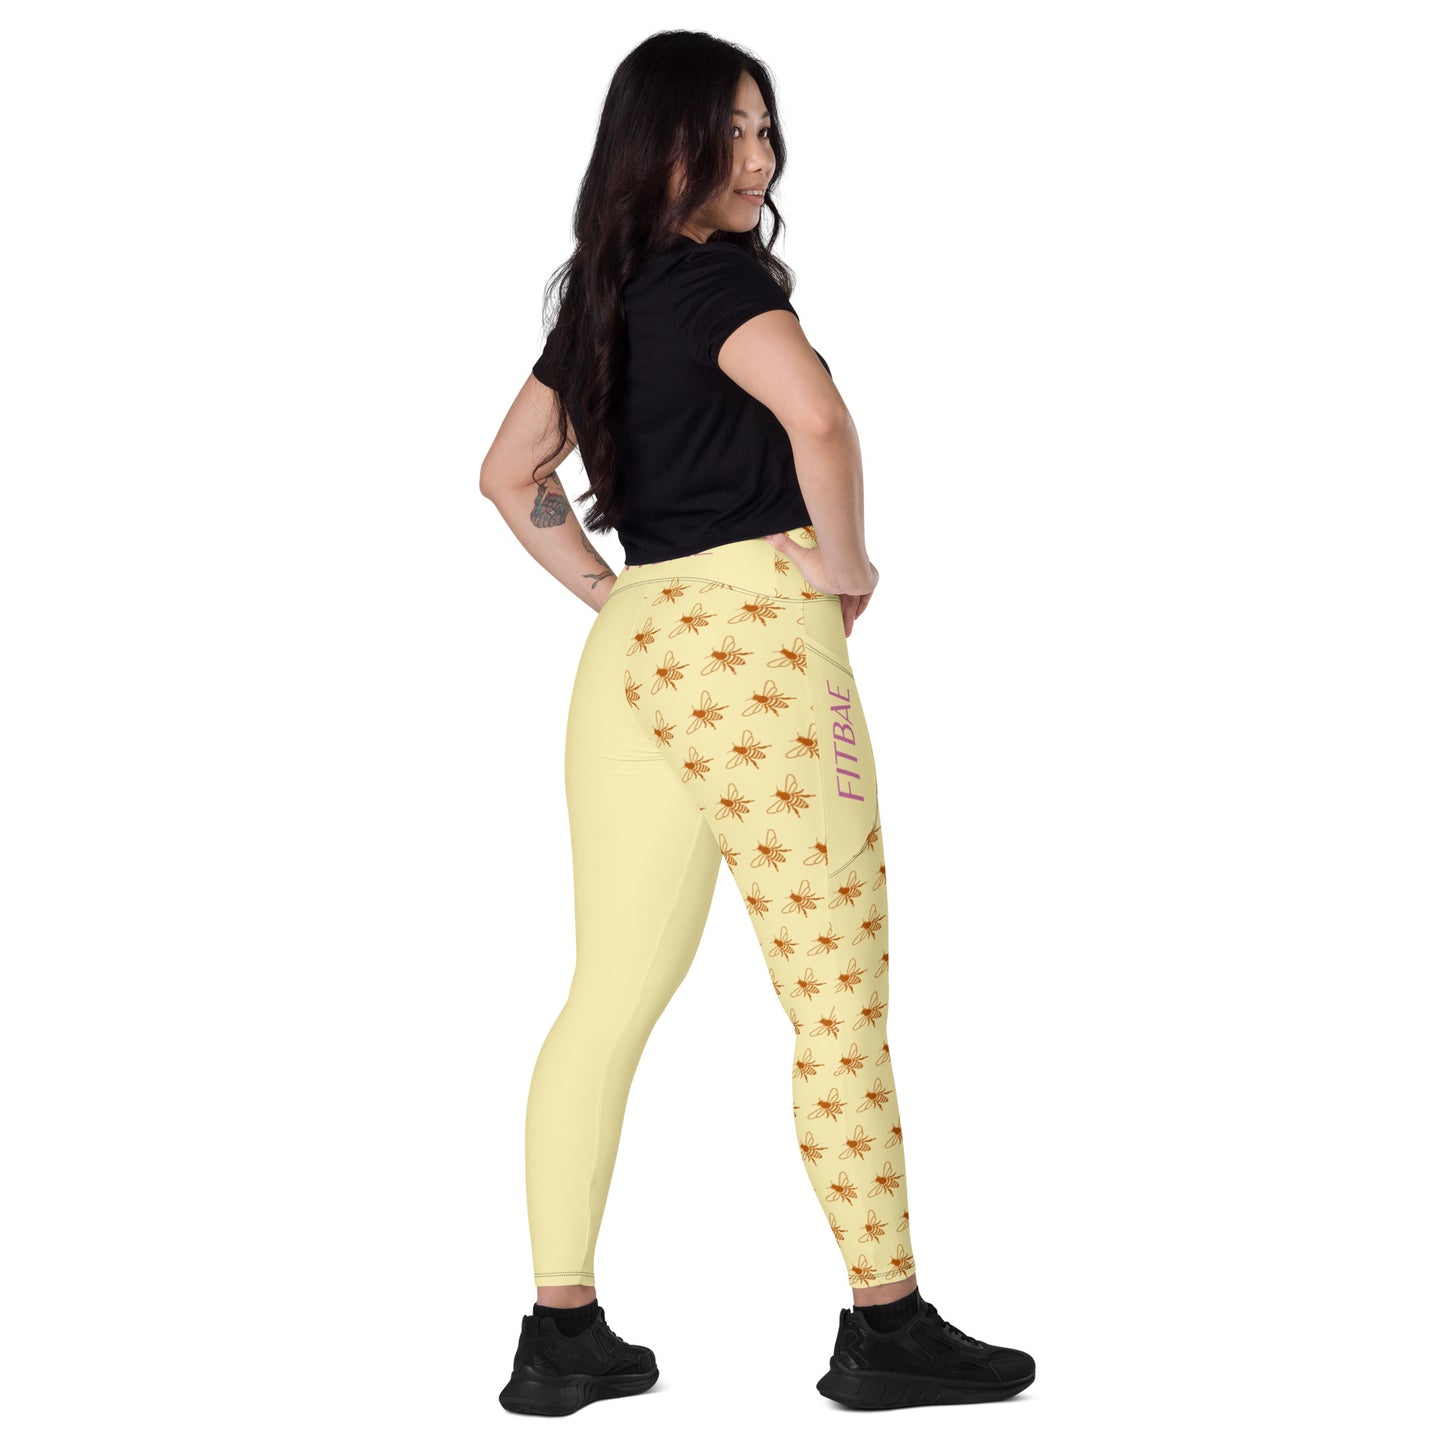 FitBae Busy Bee Crossover Leggings with Pockets